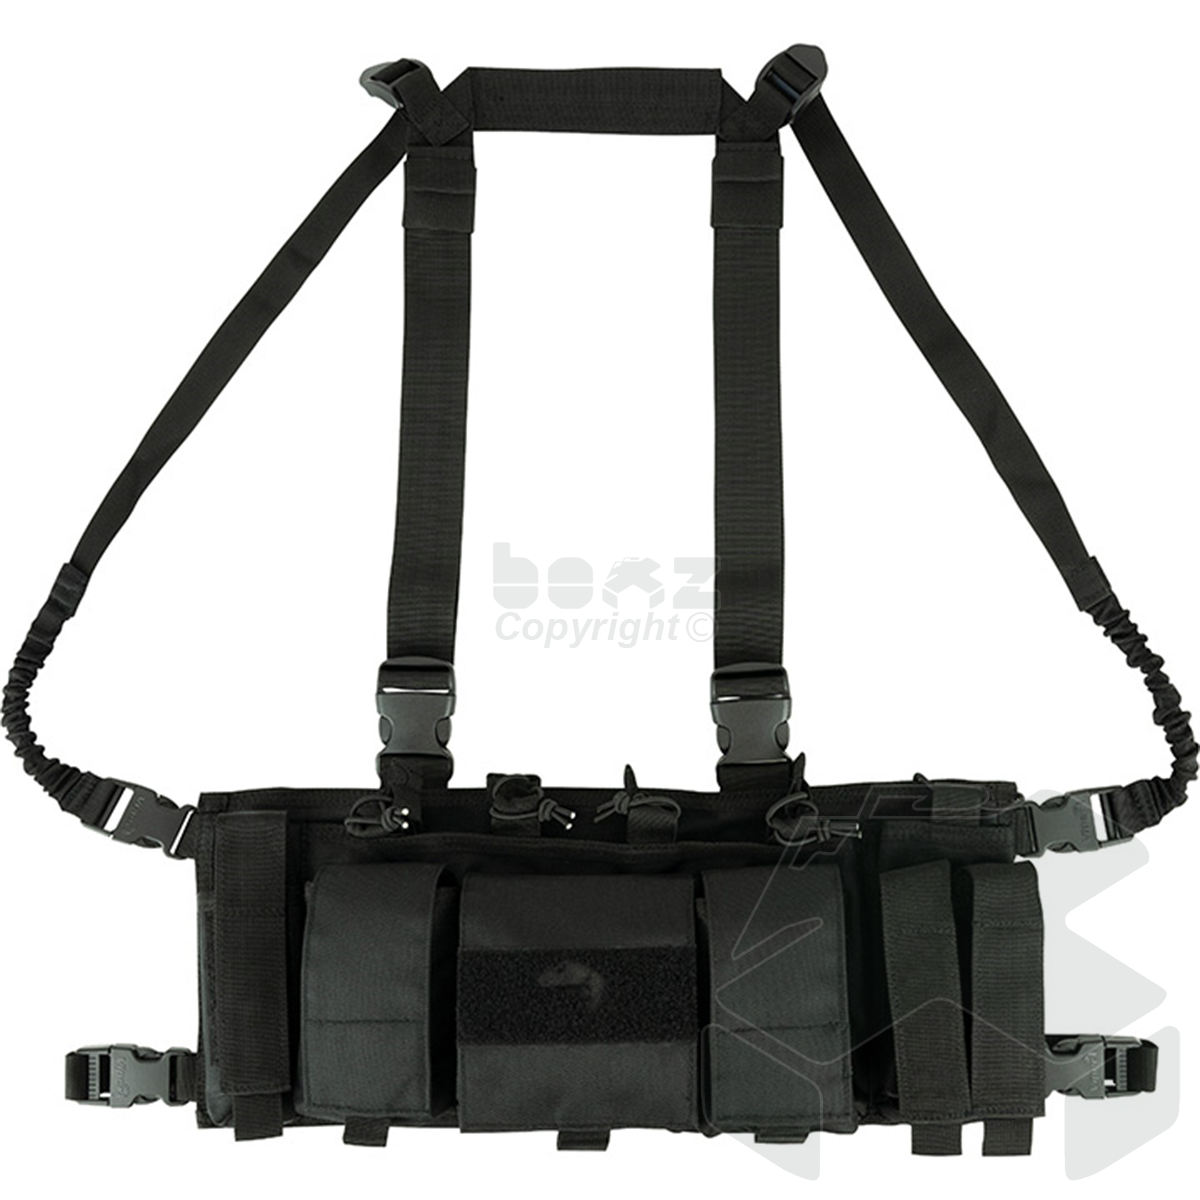 viper Special Ops Chest Rig - Black